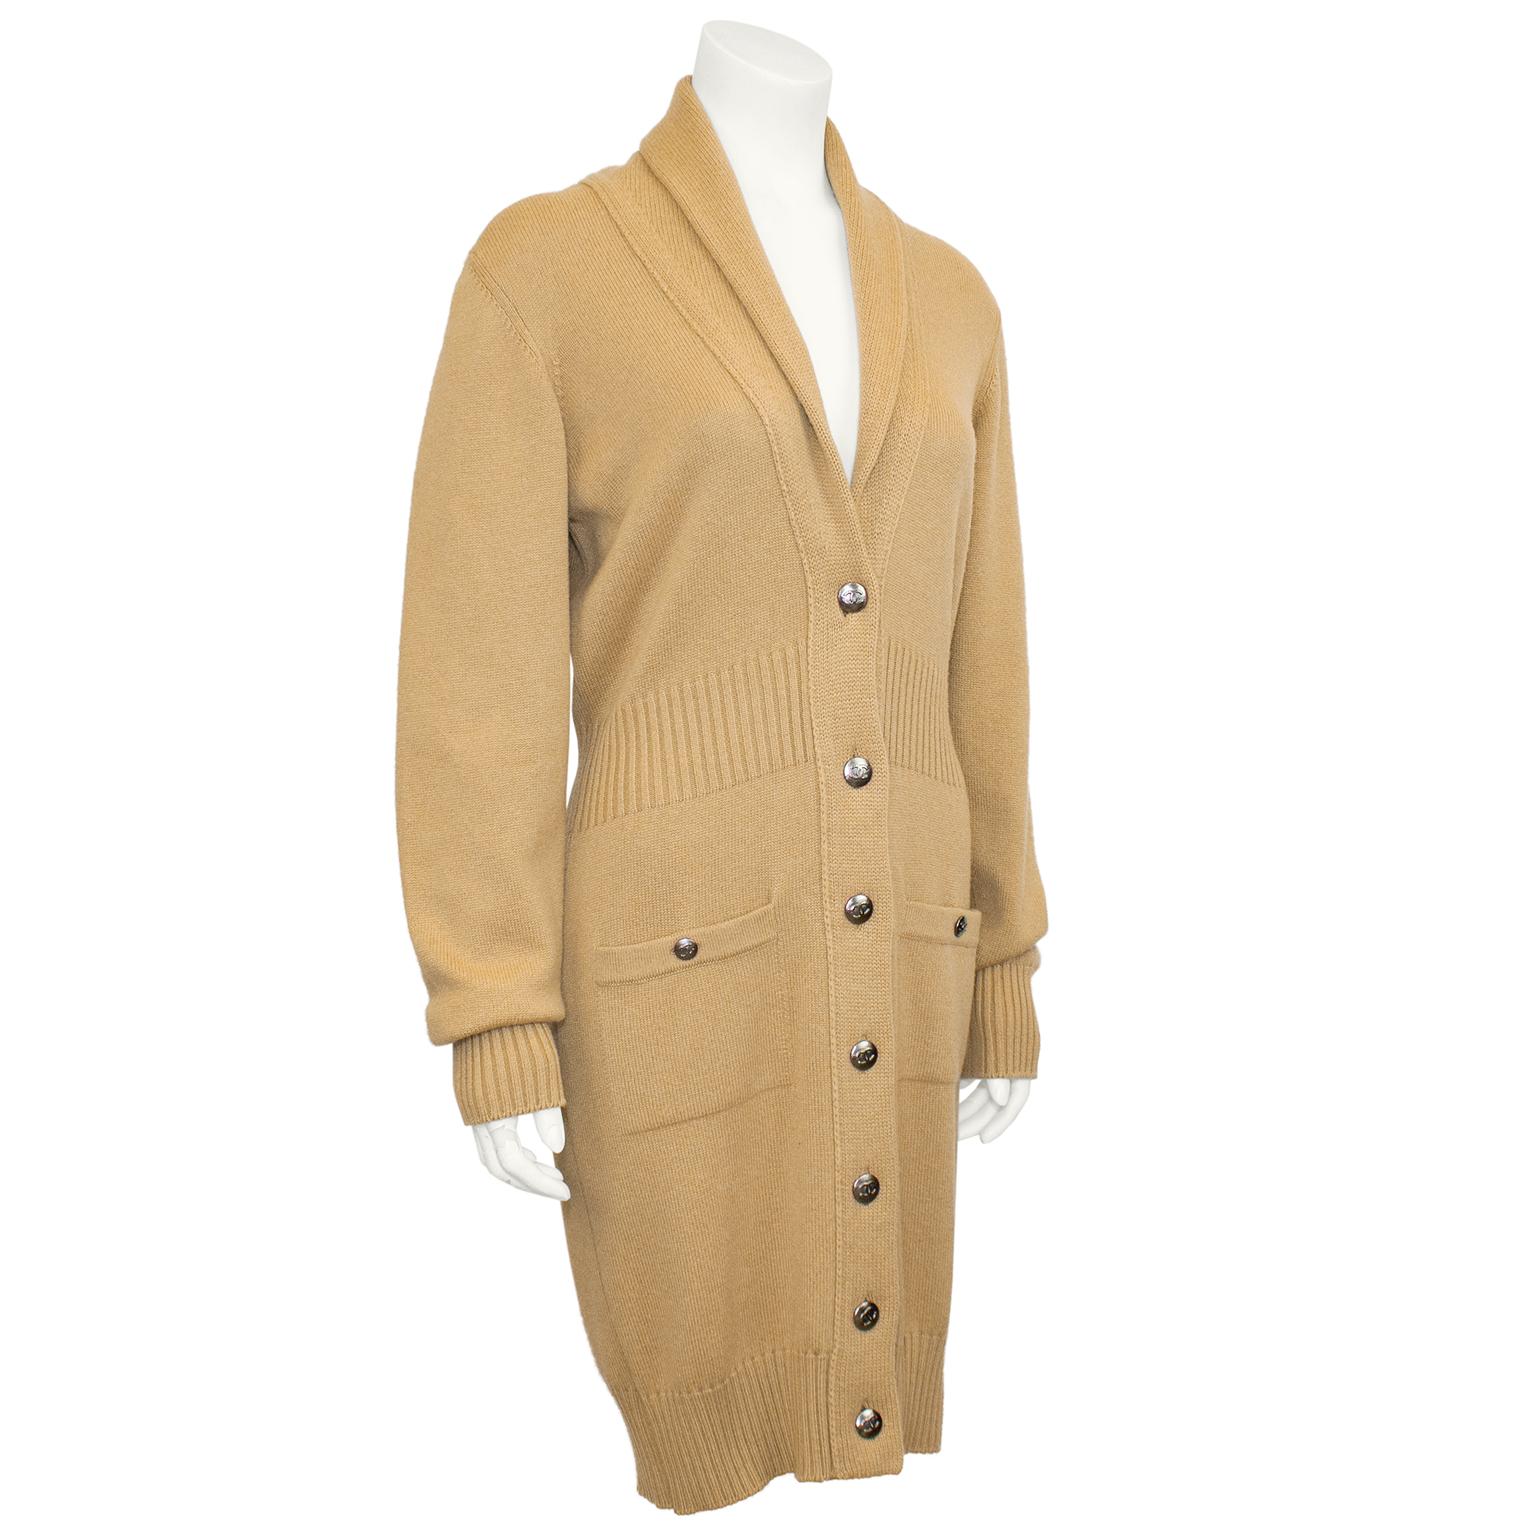 Stunning 2008 Fall/Winter camel color cashmere car coat/long cardigan with shawl collar, patch pockets and self tie belt. The cutest black appliqué Chanel jacket detail sewn on the back of the collar adds a touch of whimsy. In excellent condition,